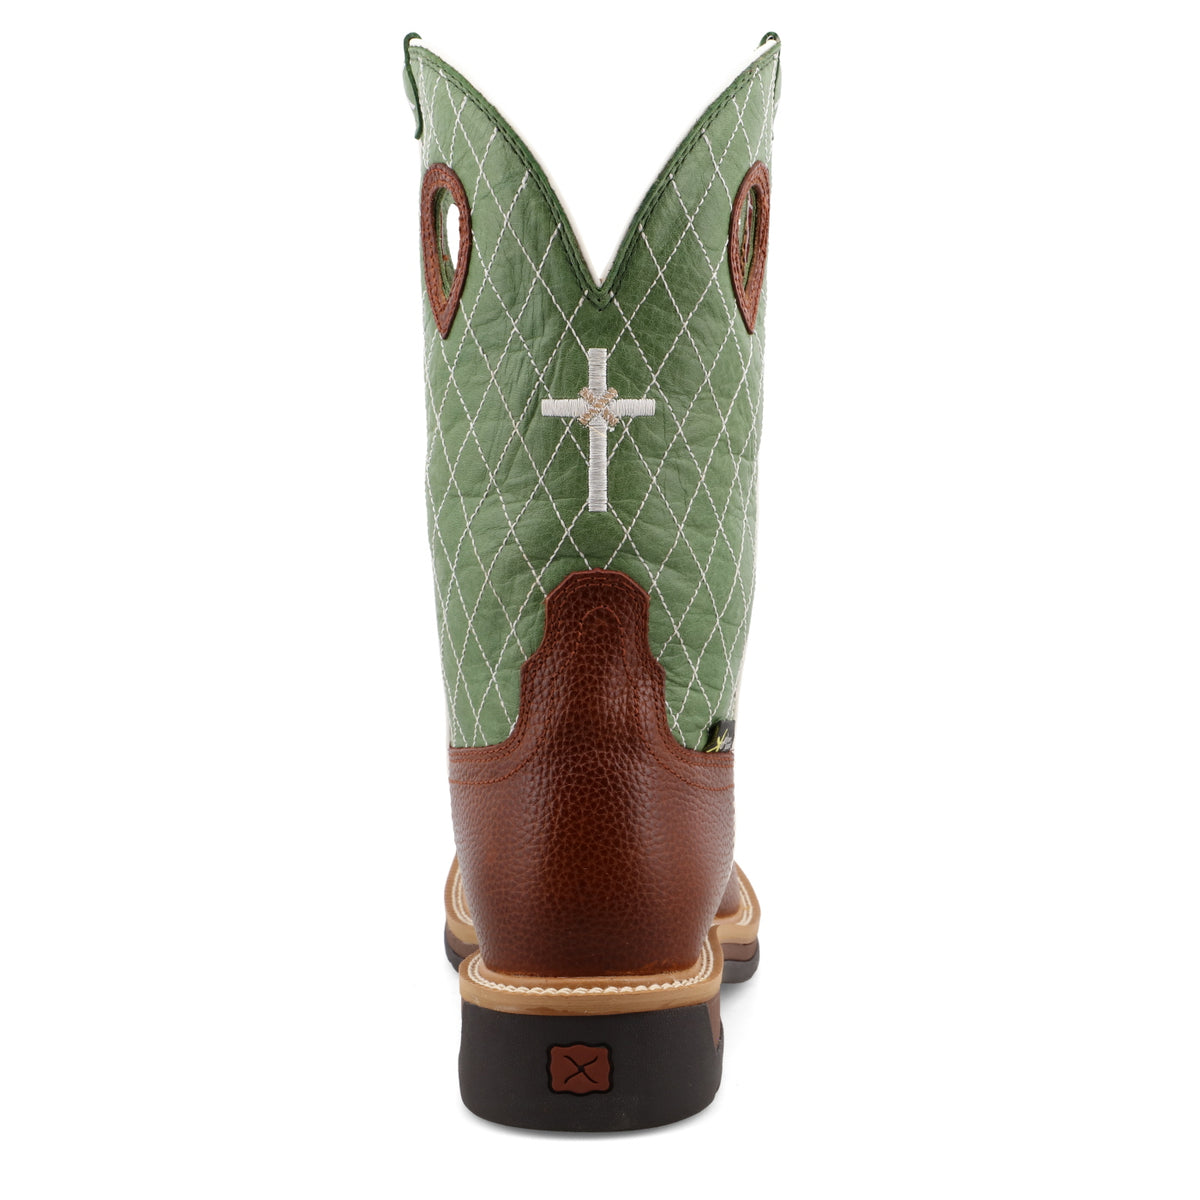 Twisted X Men's 12" Western Work Boot in Cognac Glazed Pebble and Lime